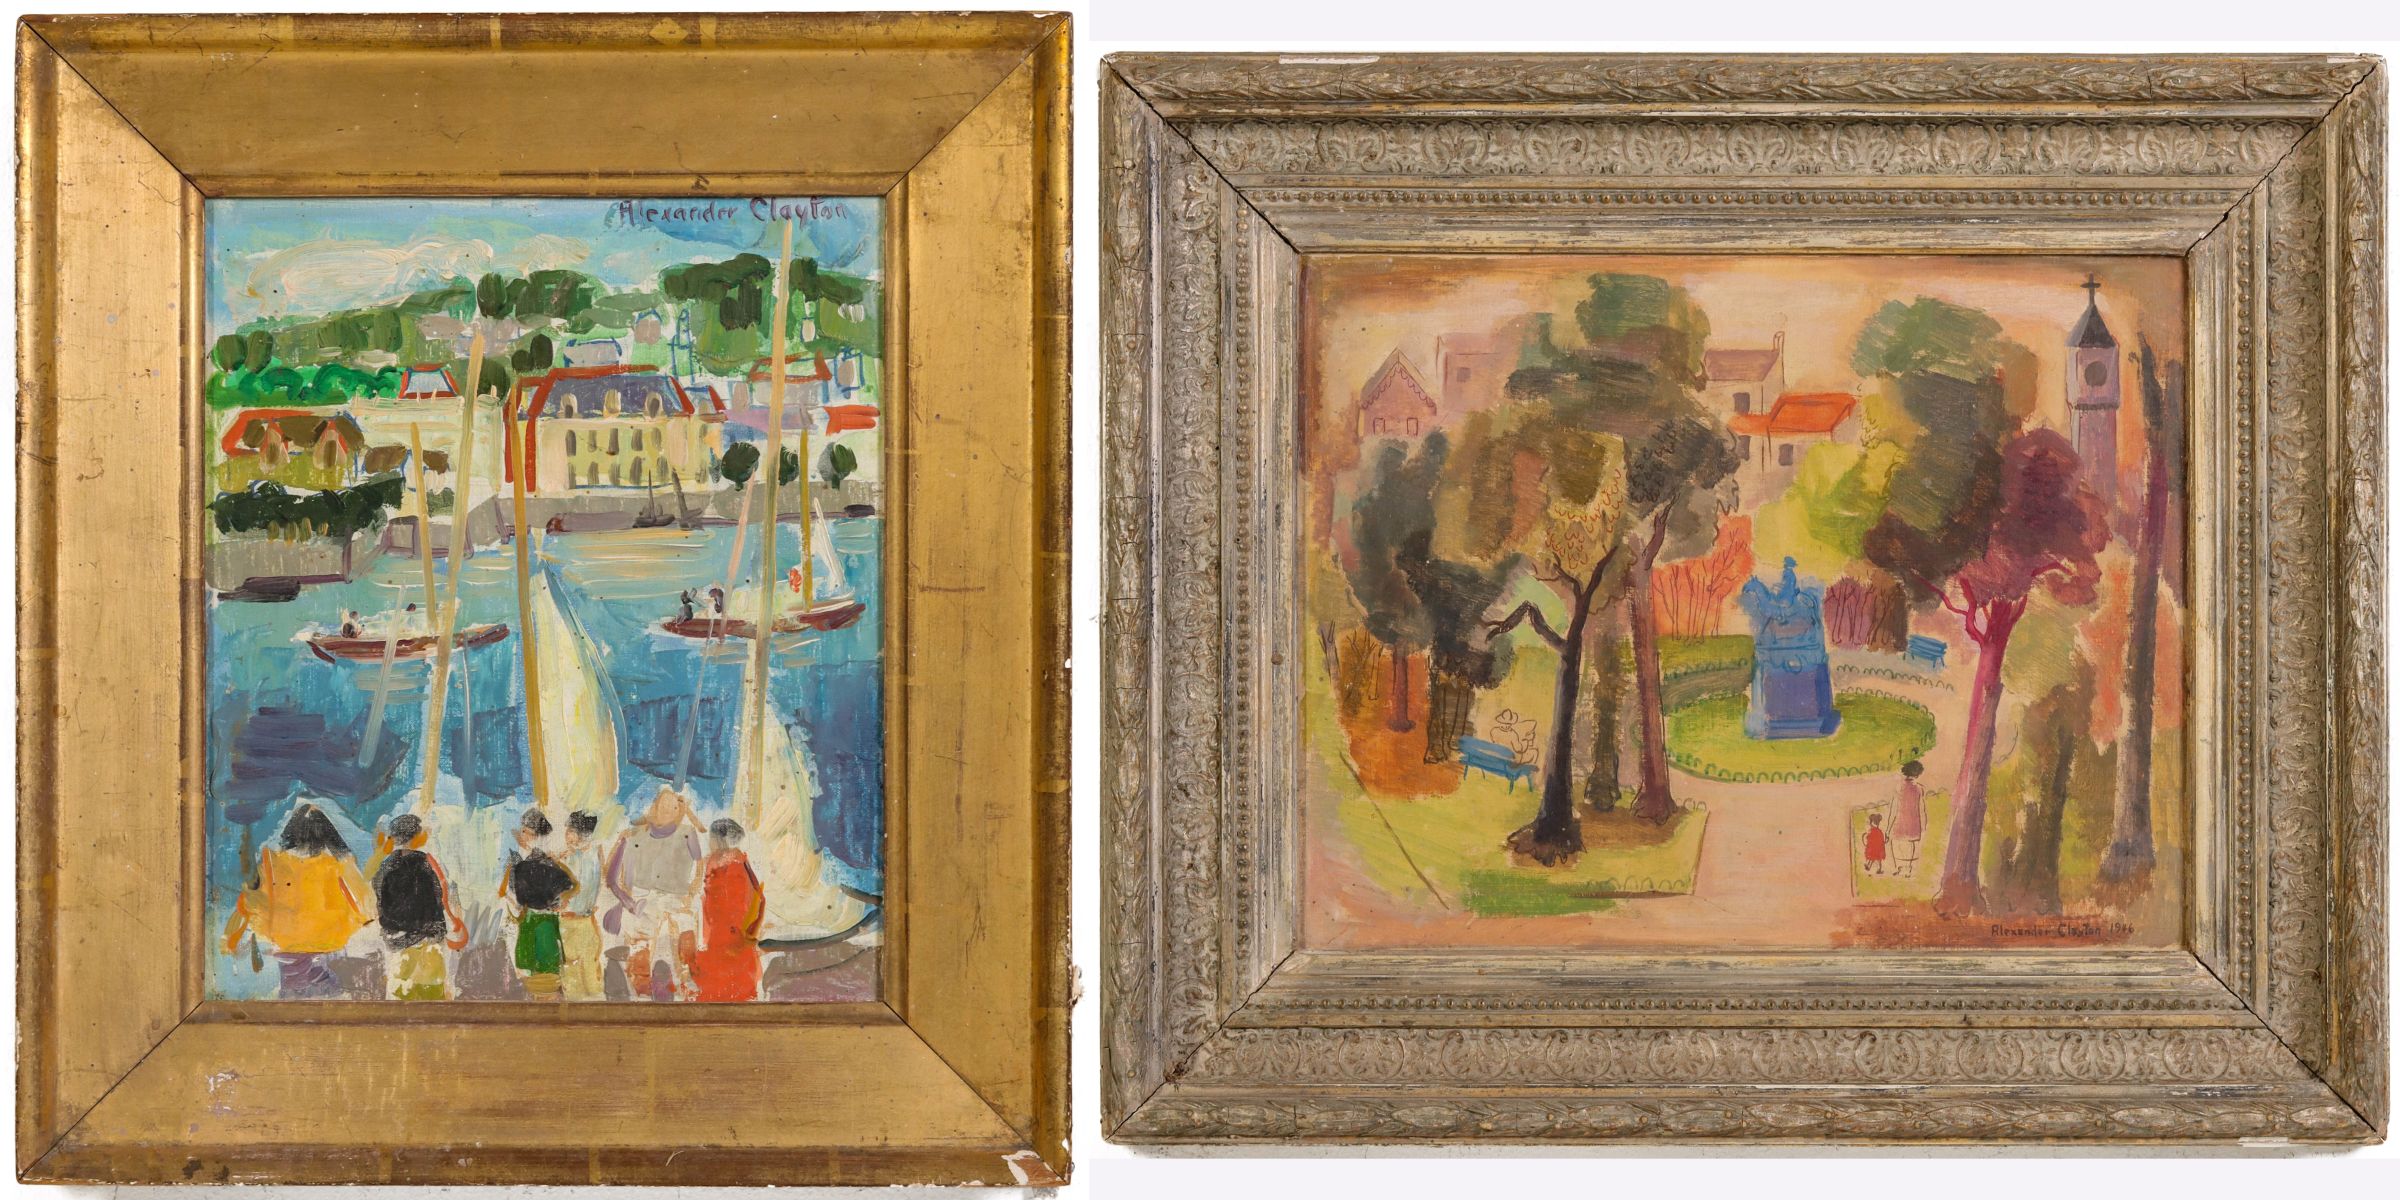 ALEXANDER CLAYTON (B. 1906) OIL ON CANVAS (TWO WORKS)